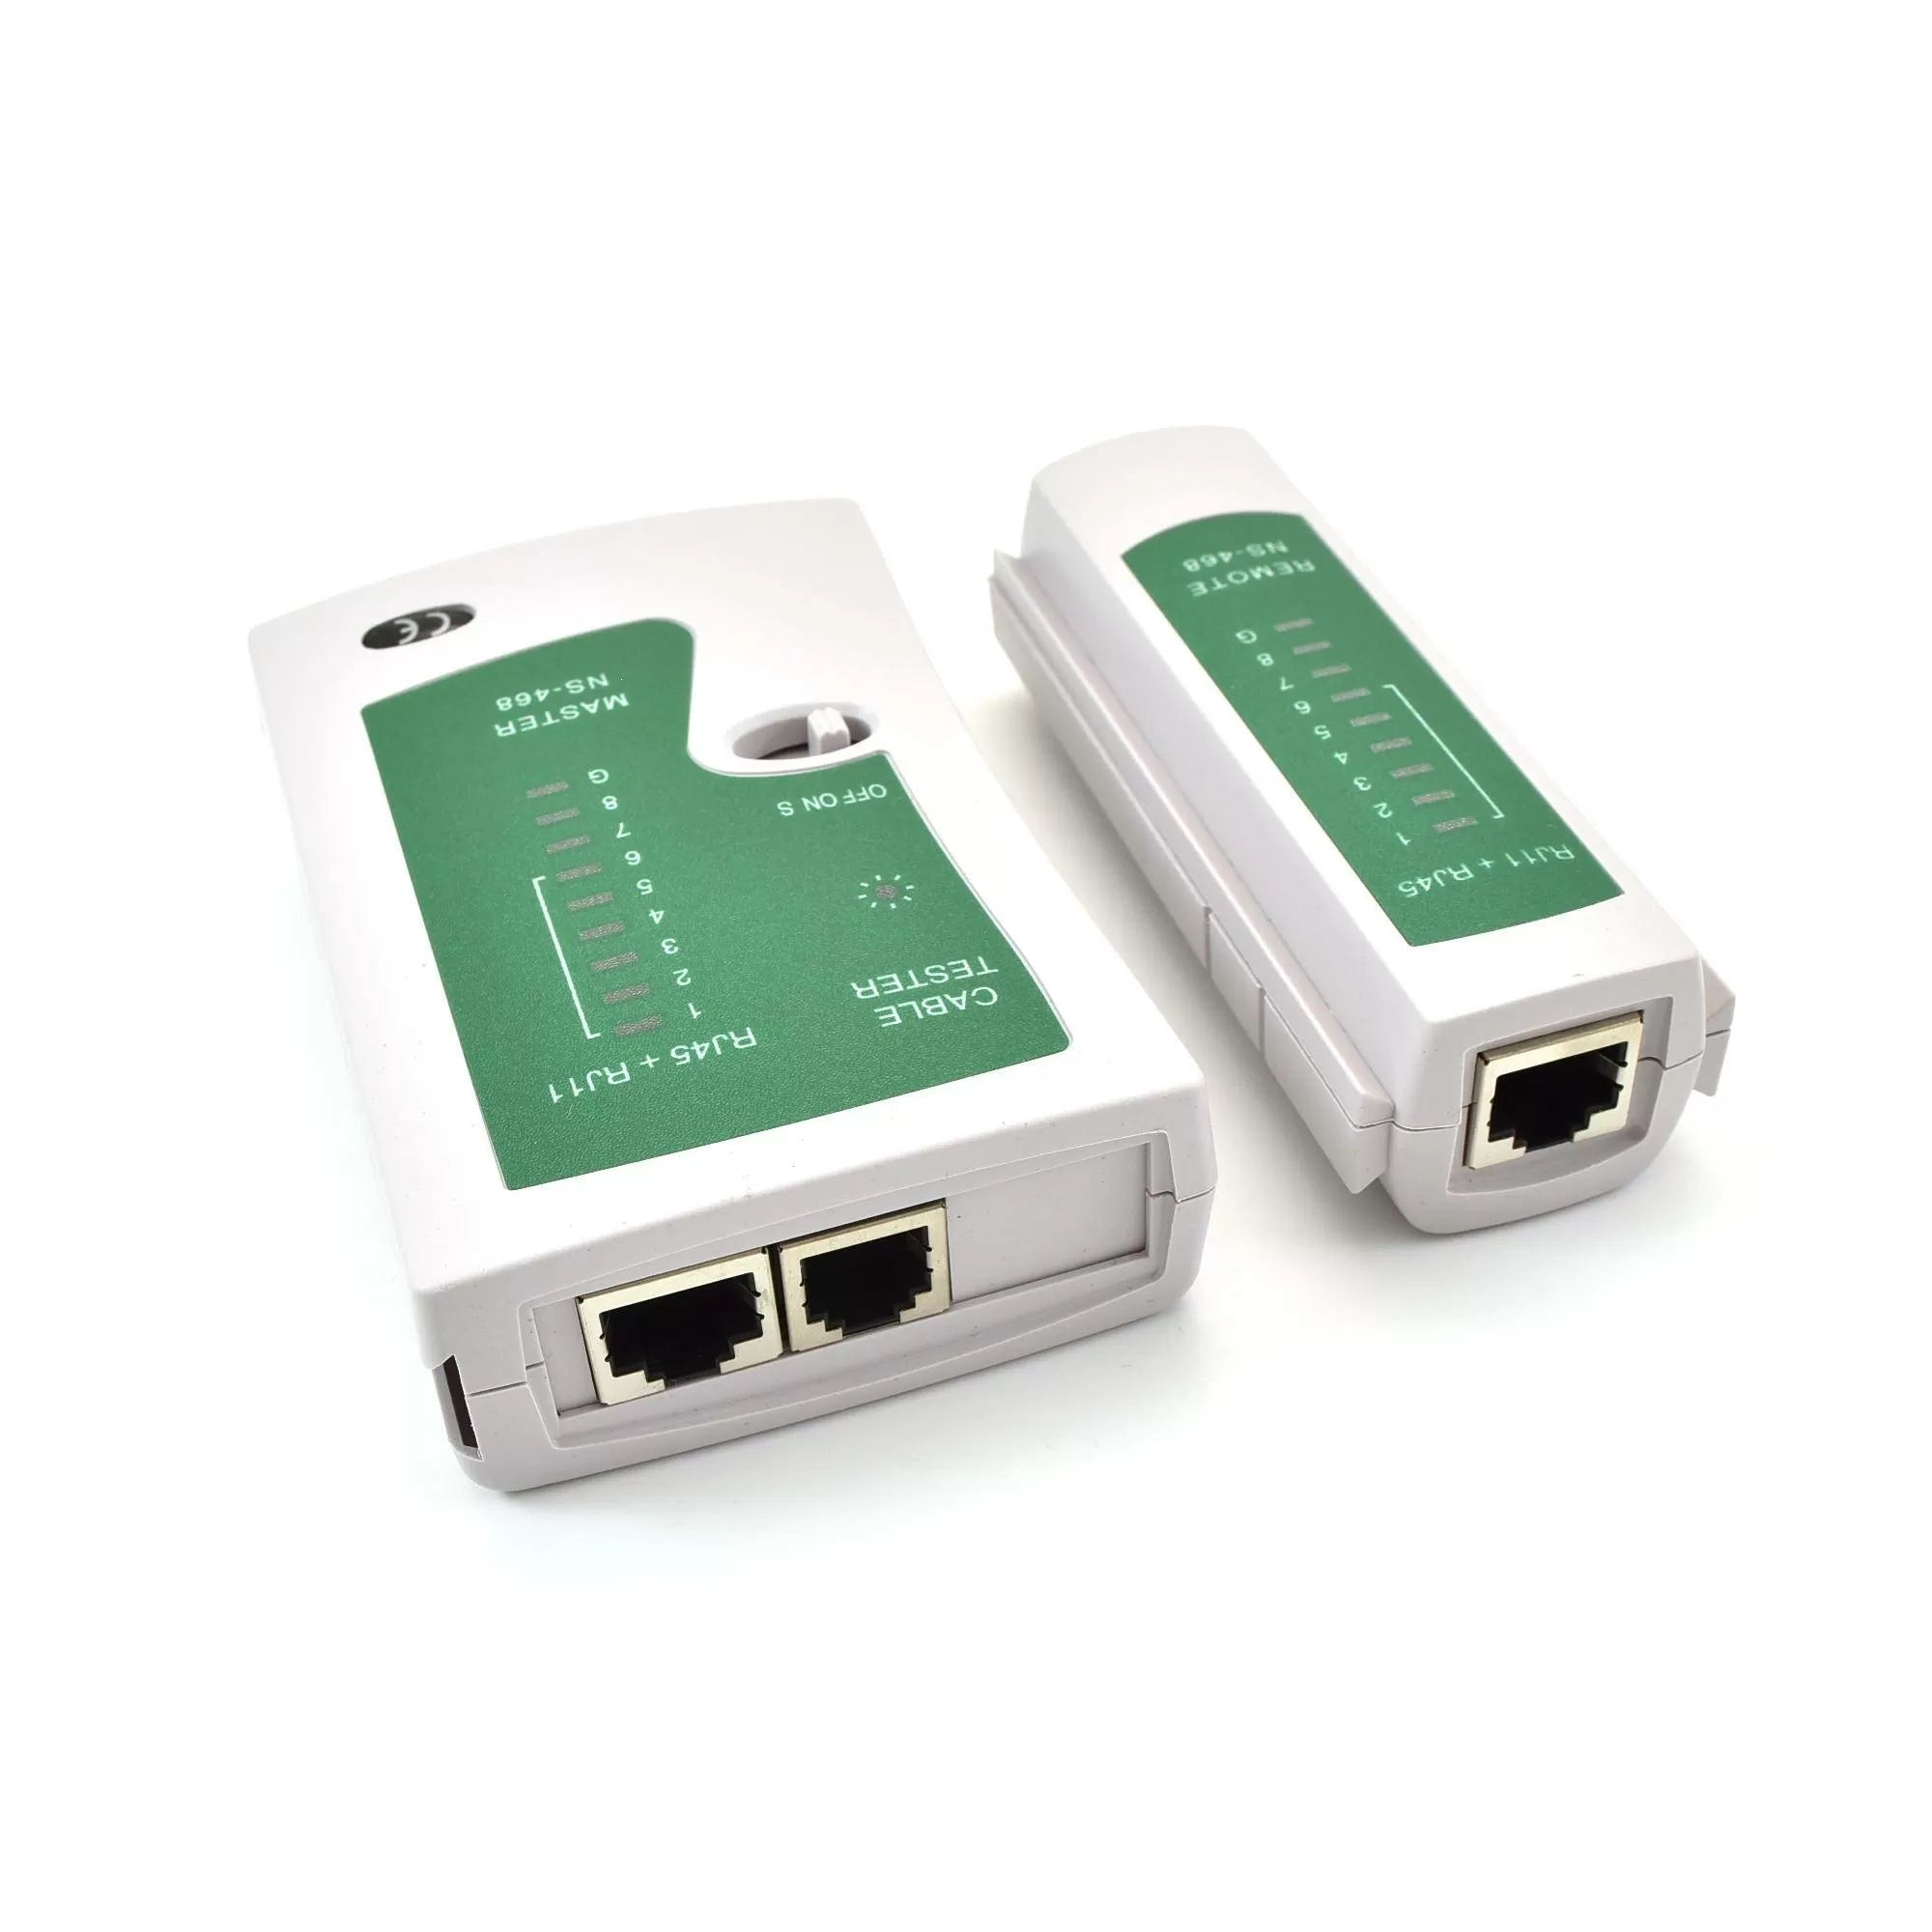 RJ45 and RJ11 Network Cable tester